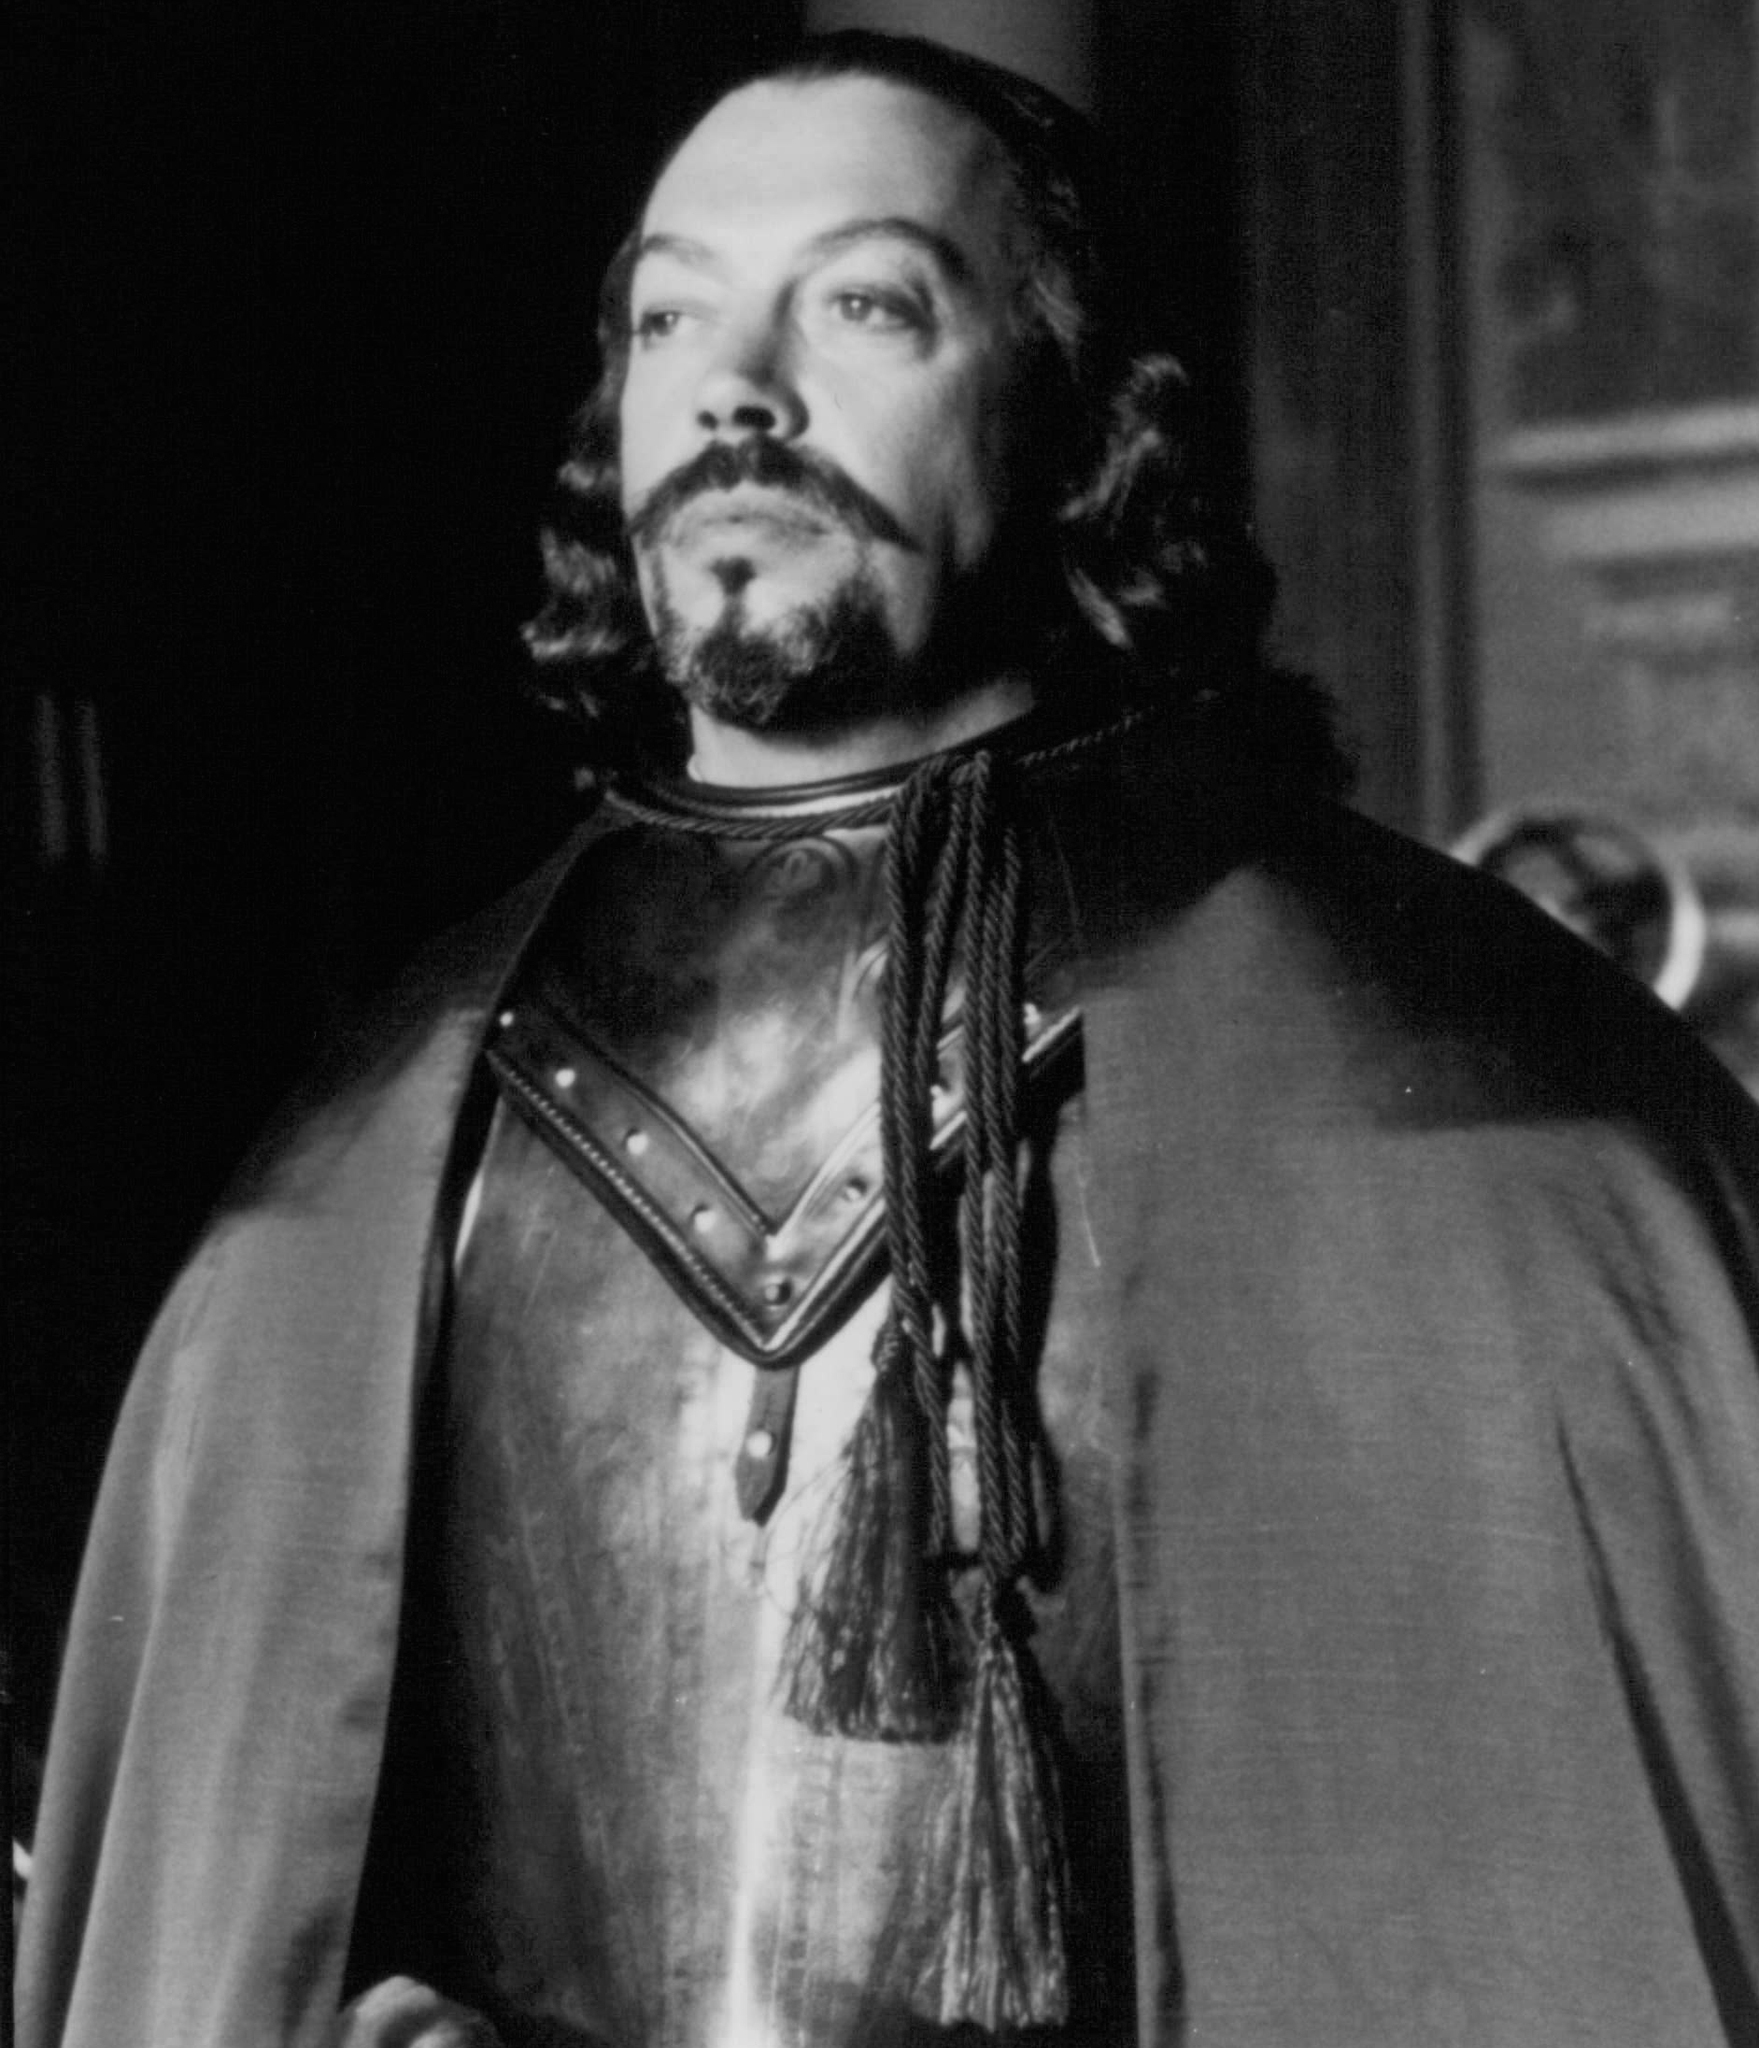 Still of Tim Curry in The Three Musketeers (1993)